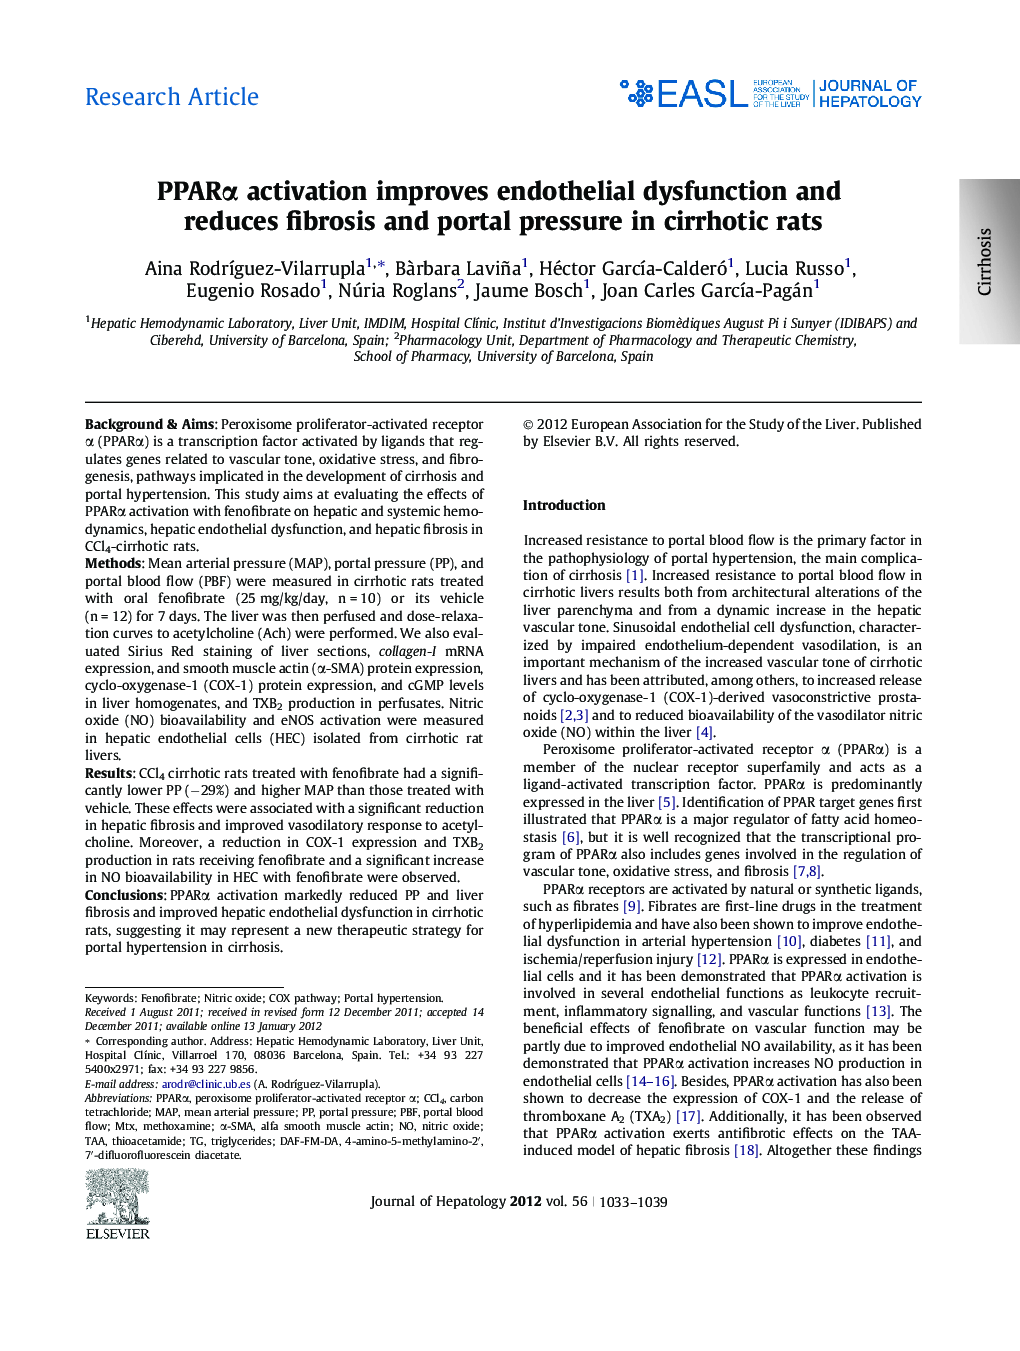 Research ArticlePPARÎ± activation improves endothelial dysfunction and reduces fibrosis and portal pressure in cirrhotic rats